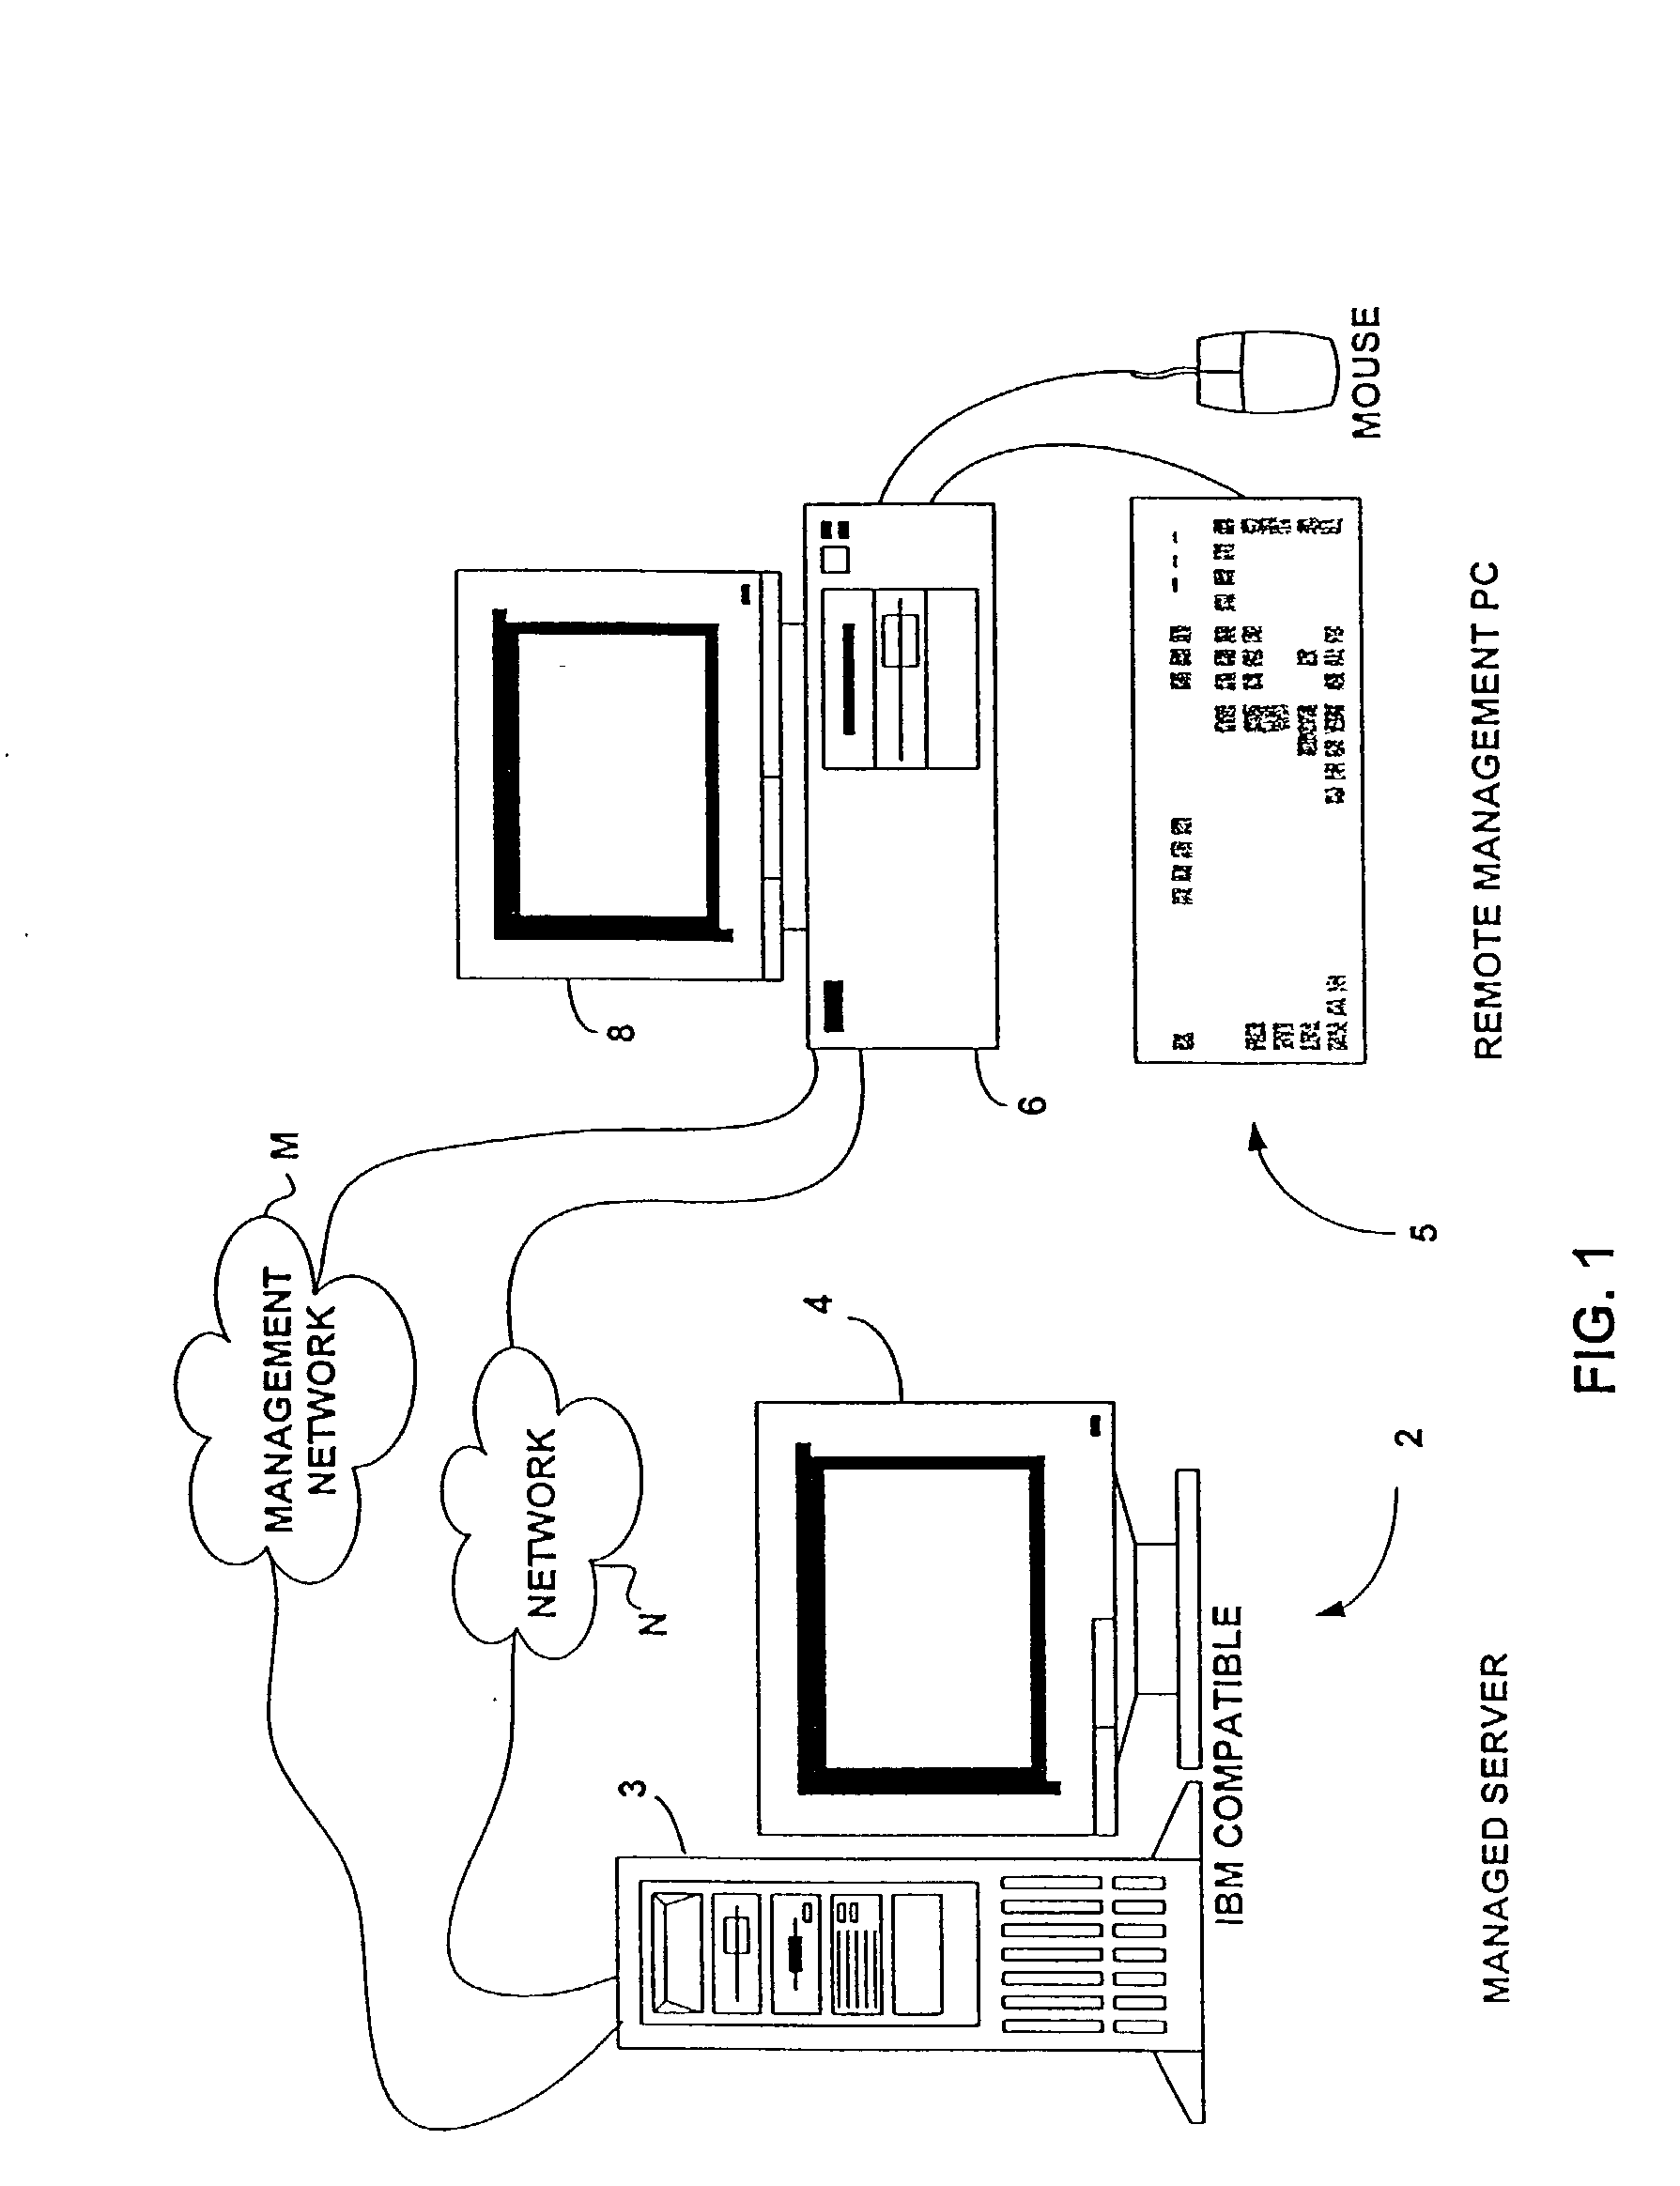 Method and apparatus for configuring security options in a computer system